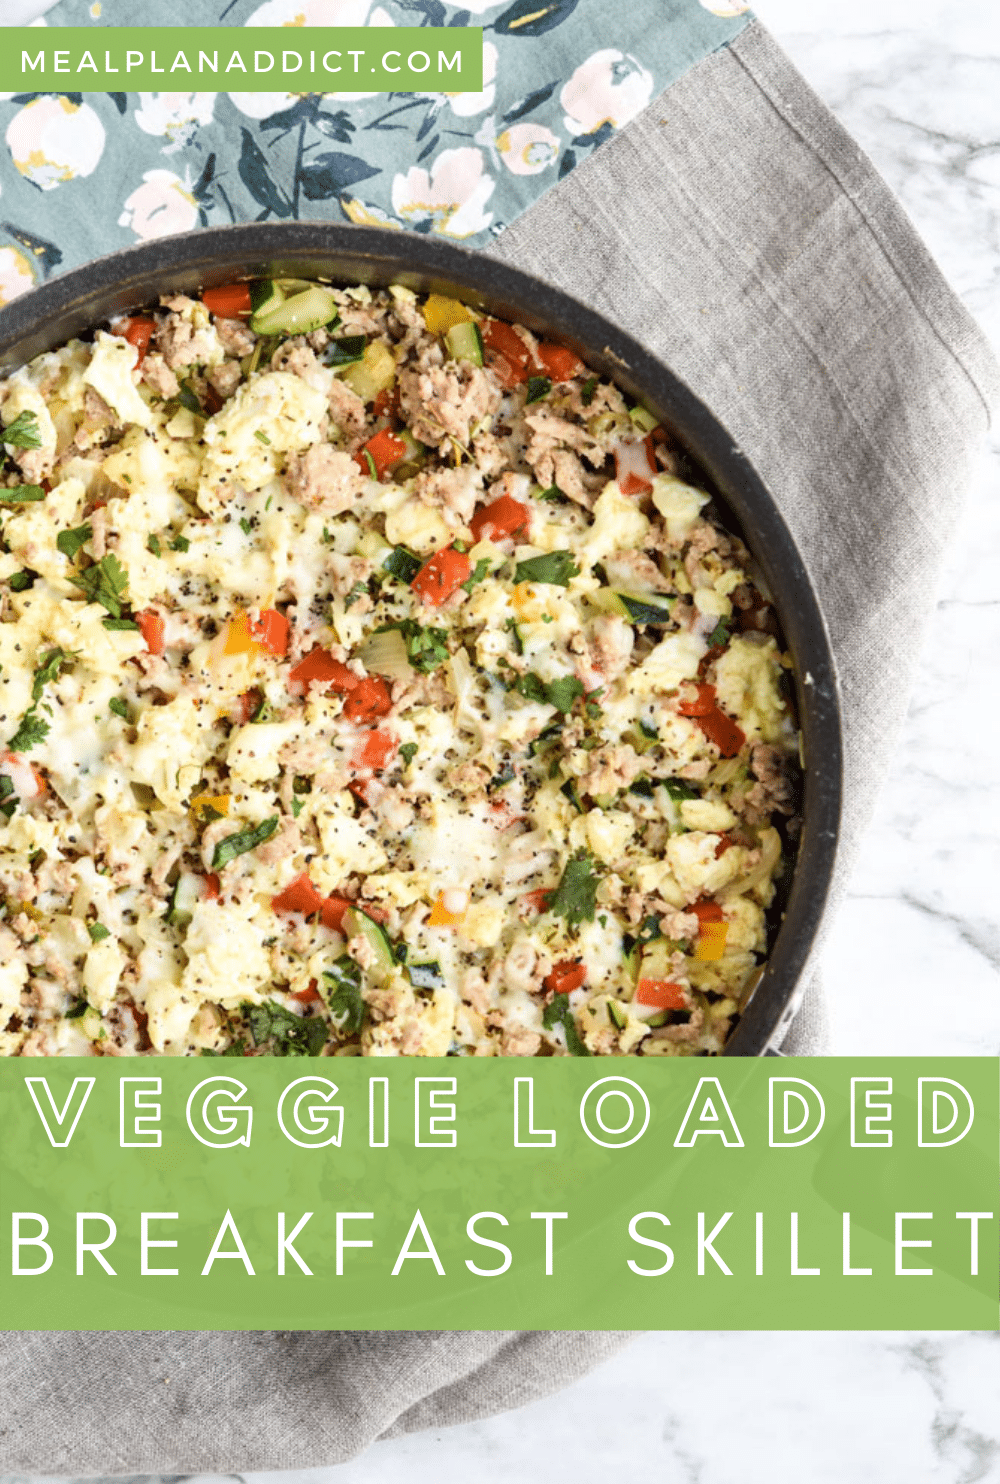 How to Make A Veggie Loaded Breakfast Skillet | Meal Plan Addict